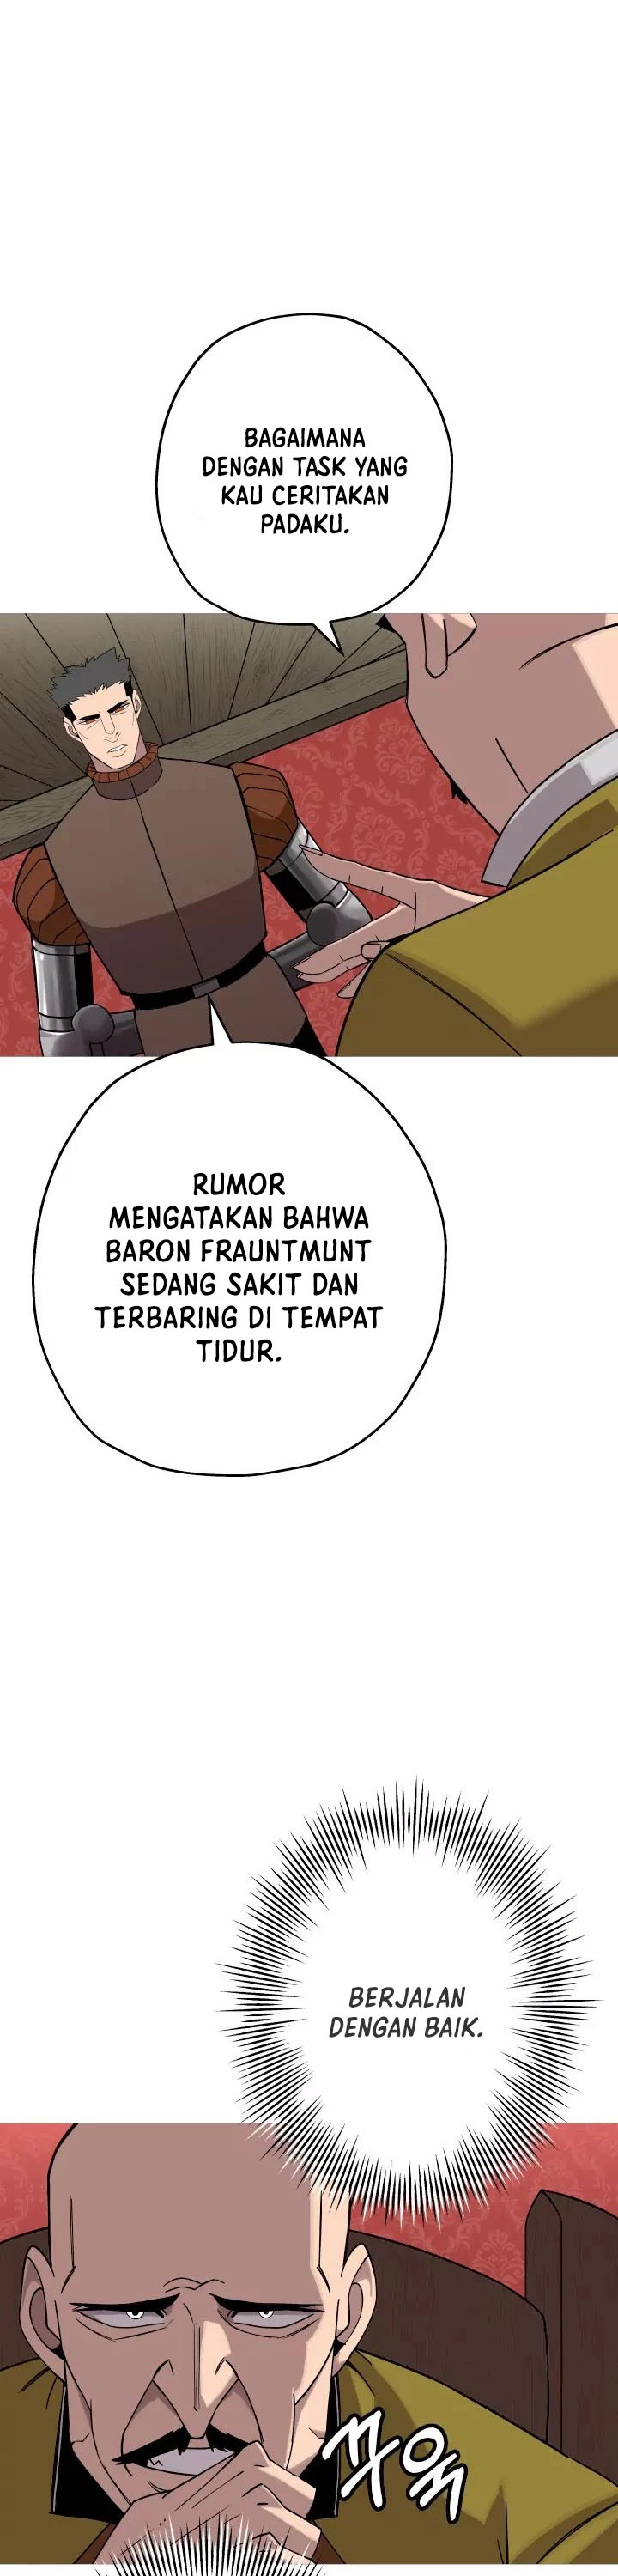 Dilarang COPAS - situs resmi www.mangacanblog.com - Komik the story of a low rank soldier becoming a monarch 075 - chapter 75 76 Indonesia the story of a low rank soldier becoming a monarch 075 - chapter 75 Terbaru 14|Baca Manga Komik Indonesia|Mangacan